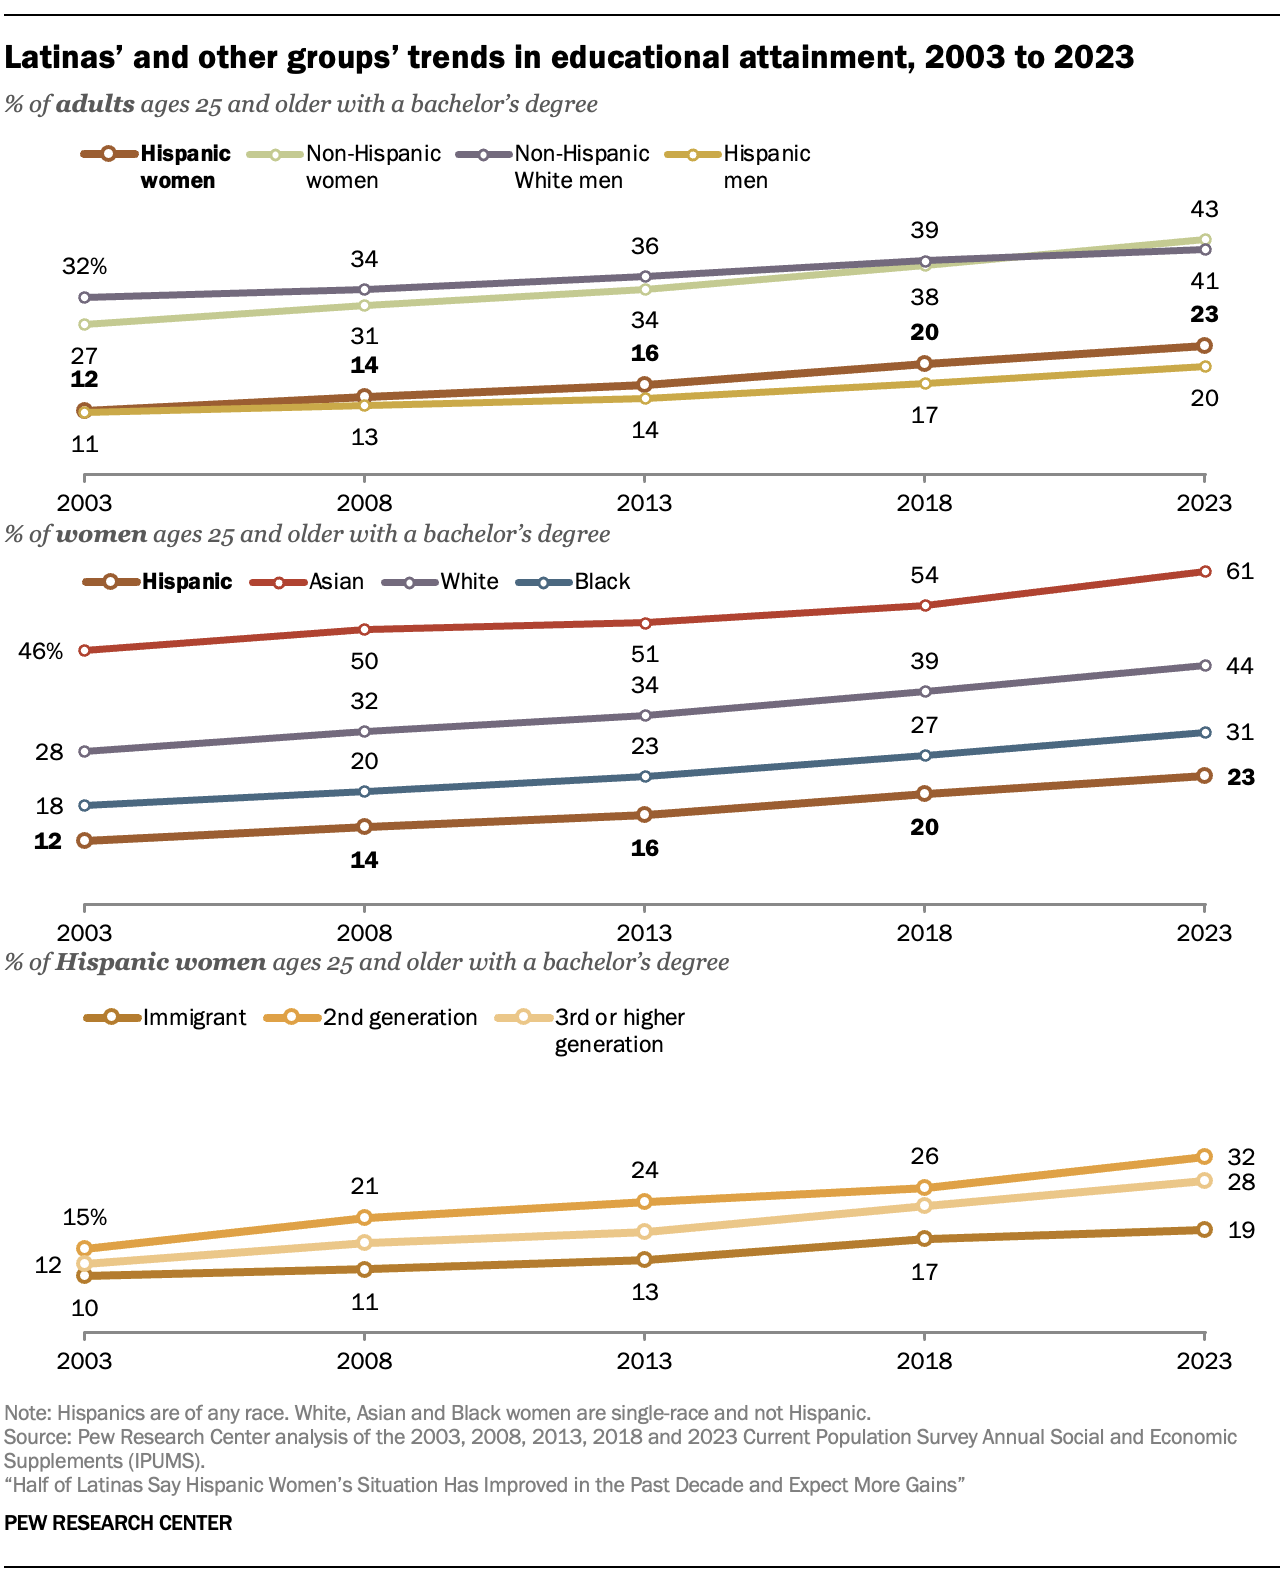 A series of line graphs showing Latinas’ and other groups’ trends in educational attainment from 2003 to 2023.